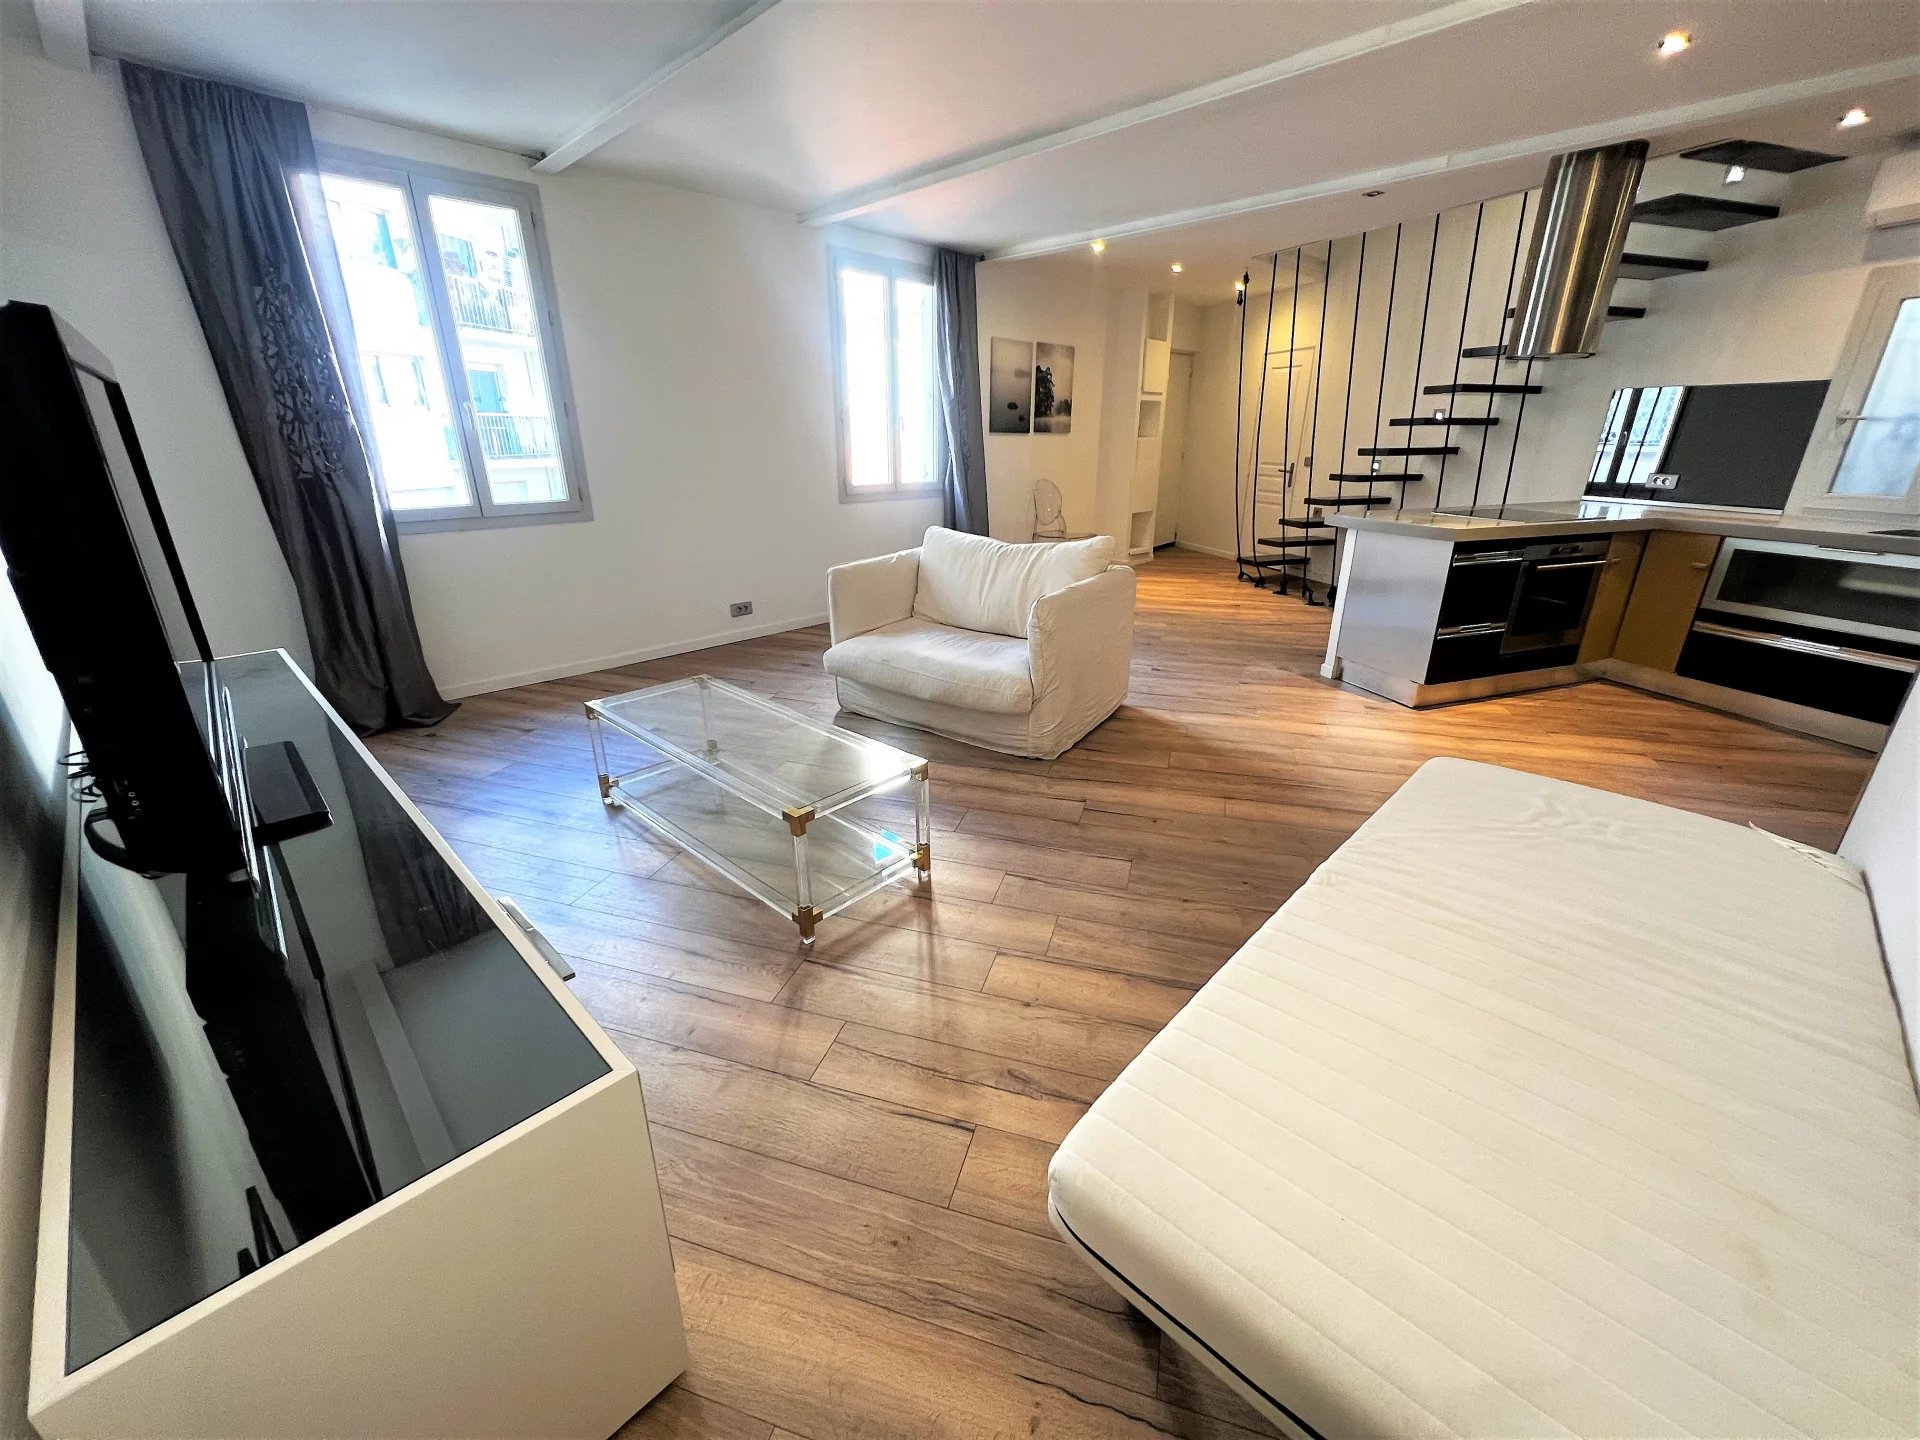 NICE - CARRE D'OR~APPARTEMENT DUPLEX